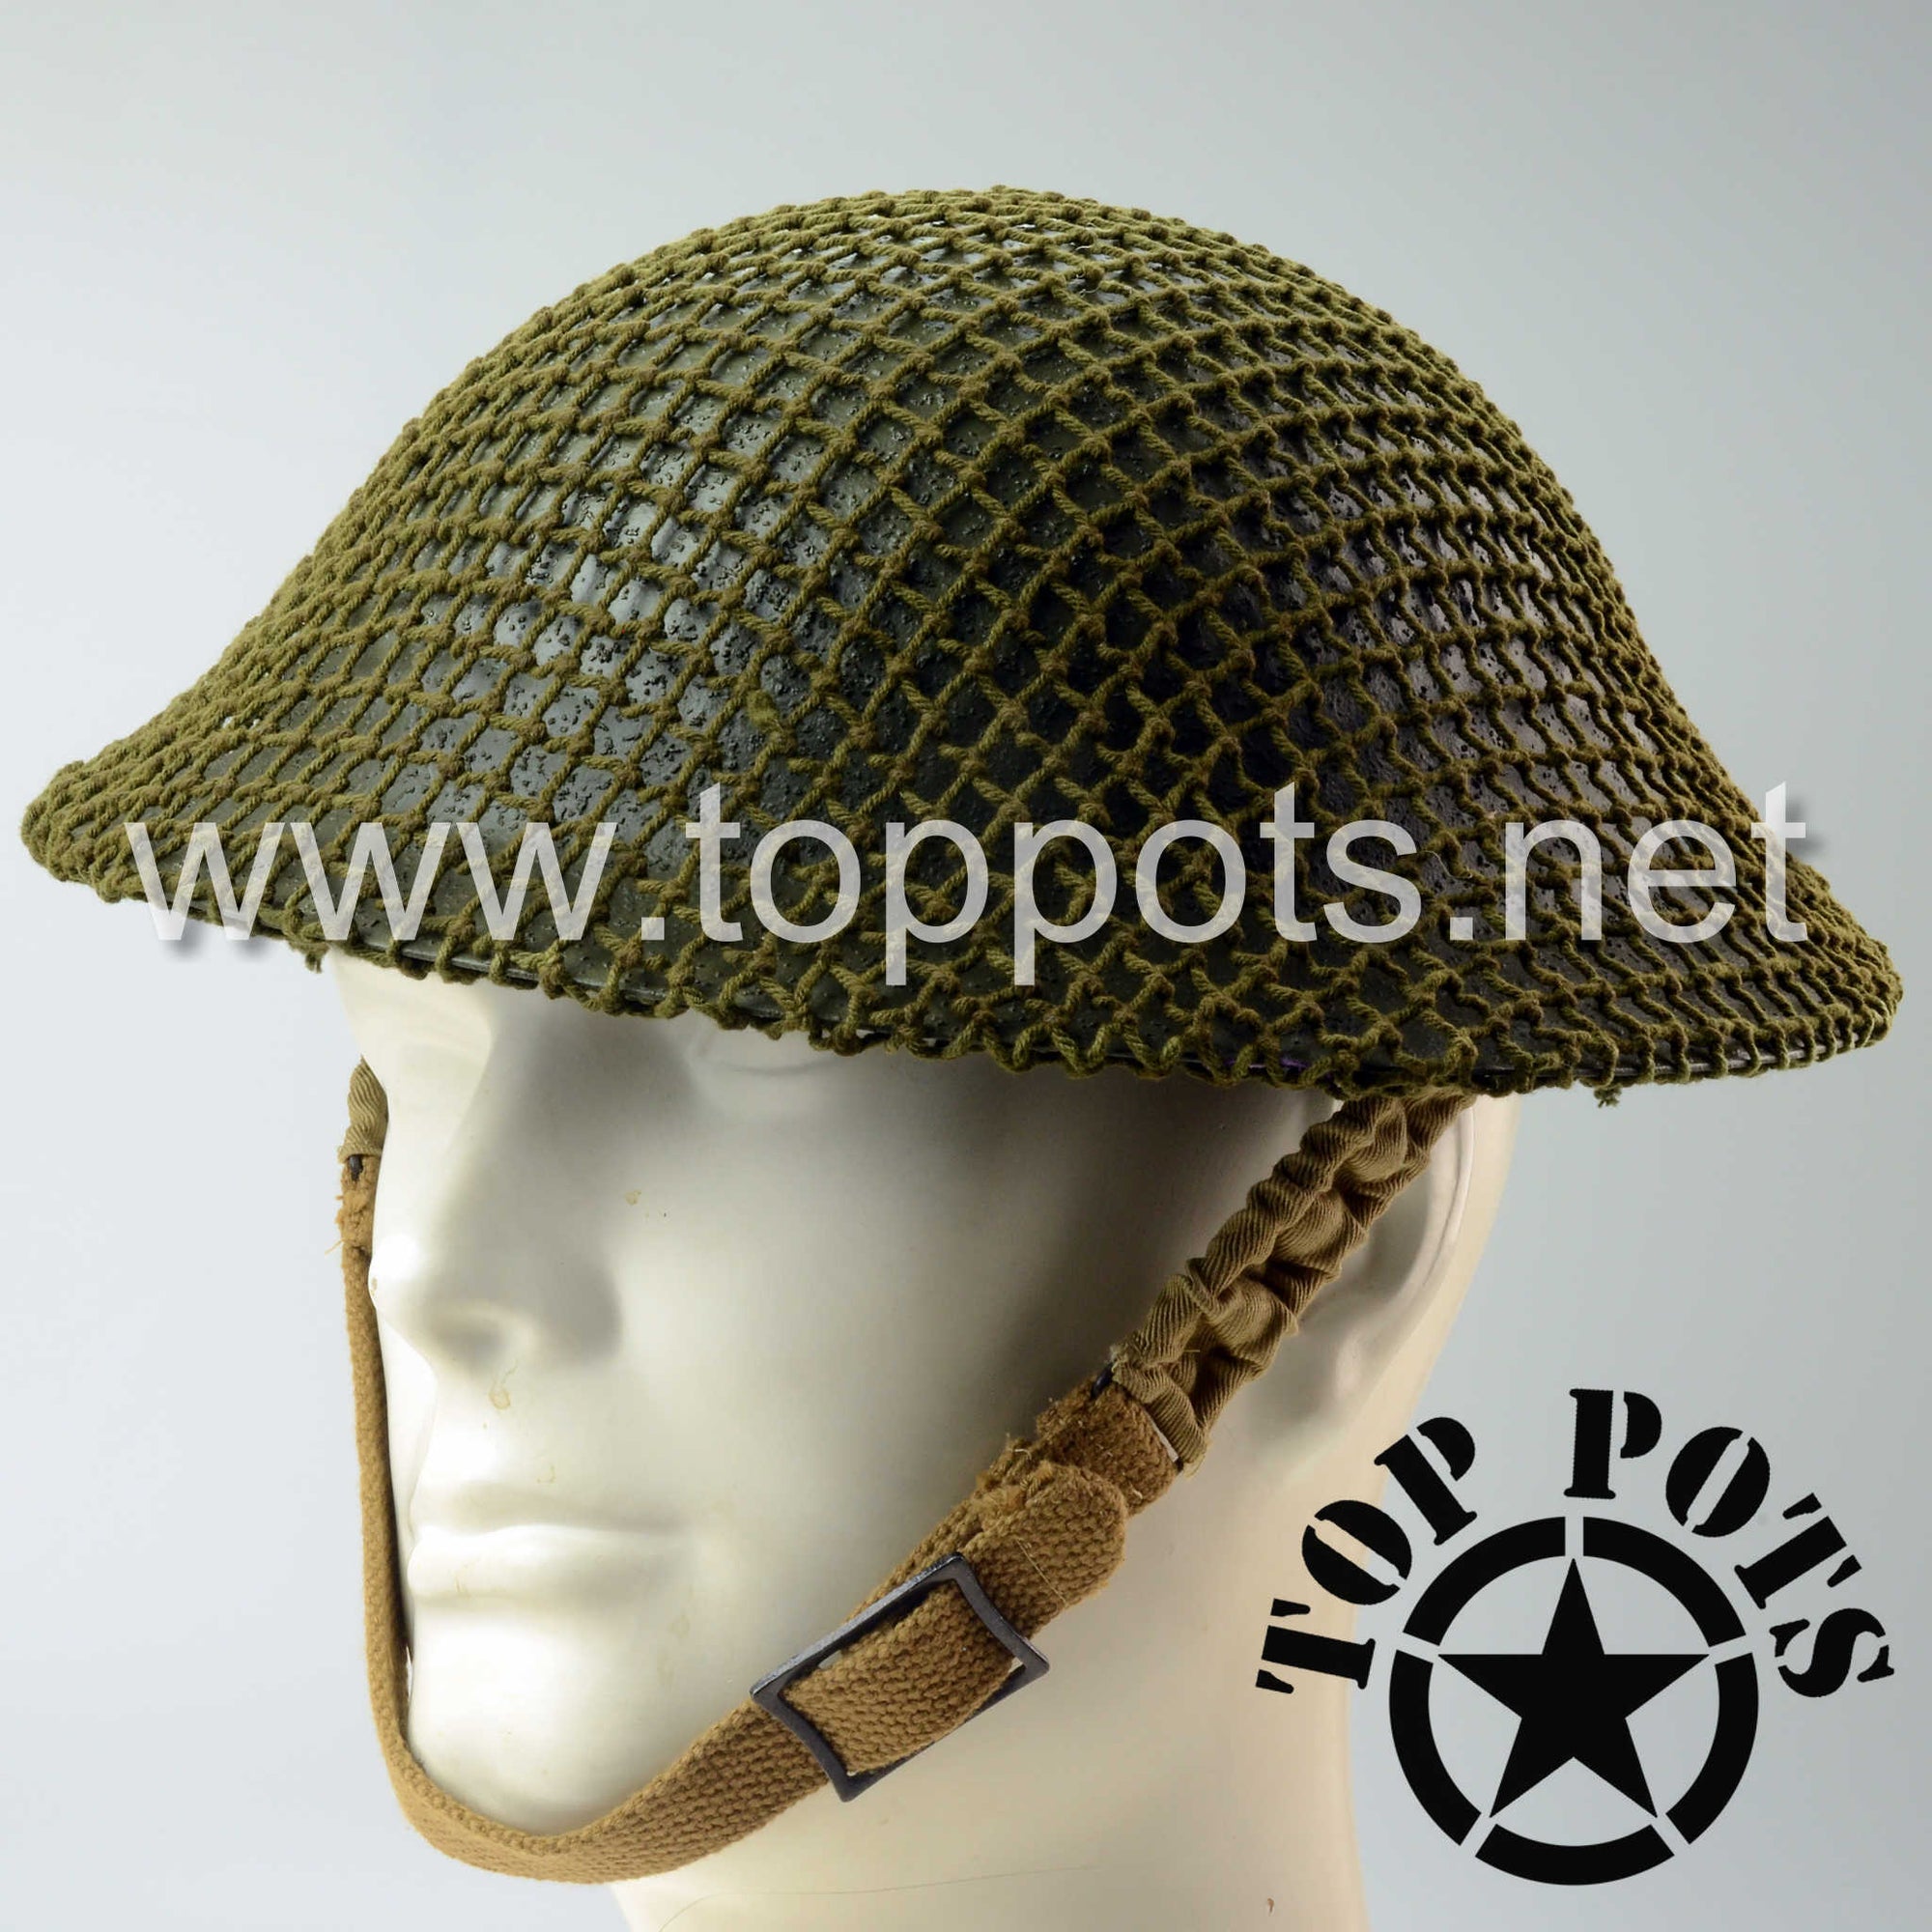 WWII Australian Army Reproduction MKII MK2 Enlisted Brodie Helmet with Original Helmet Net – Field Textured Finish